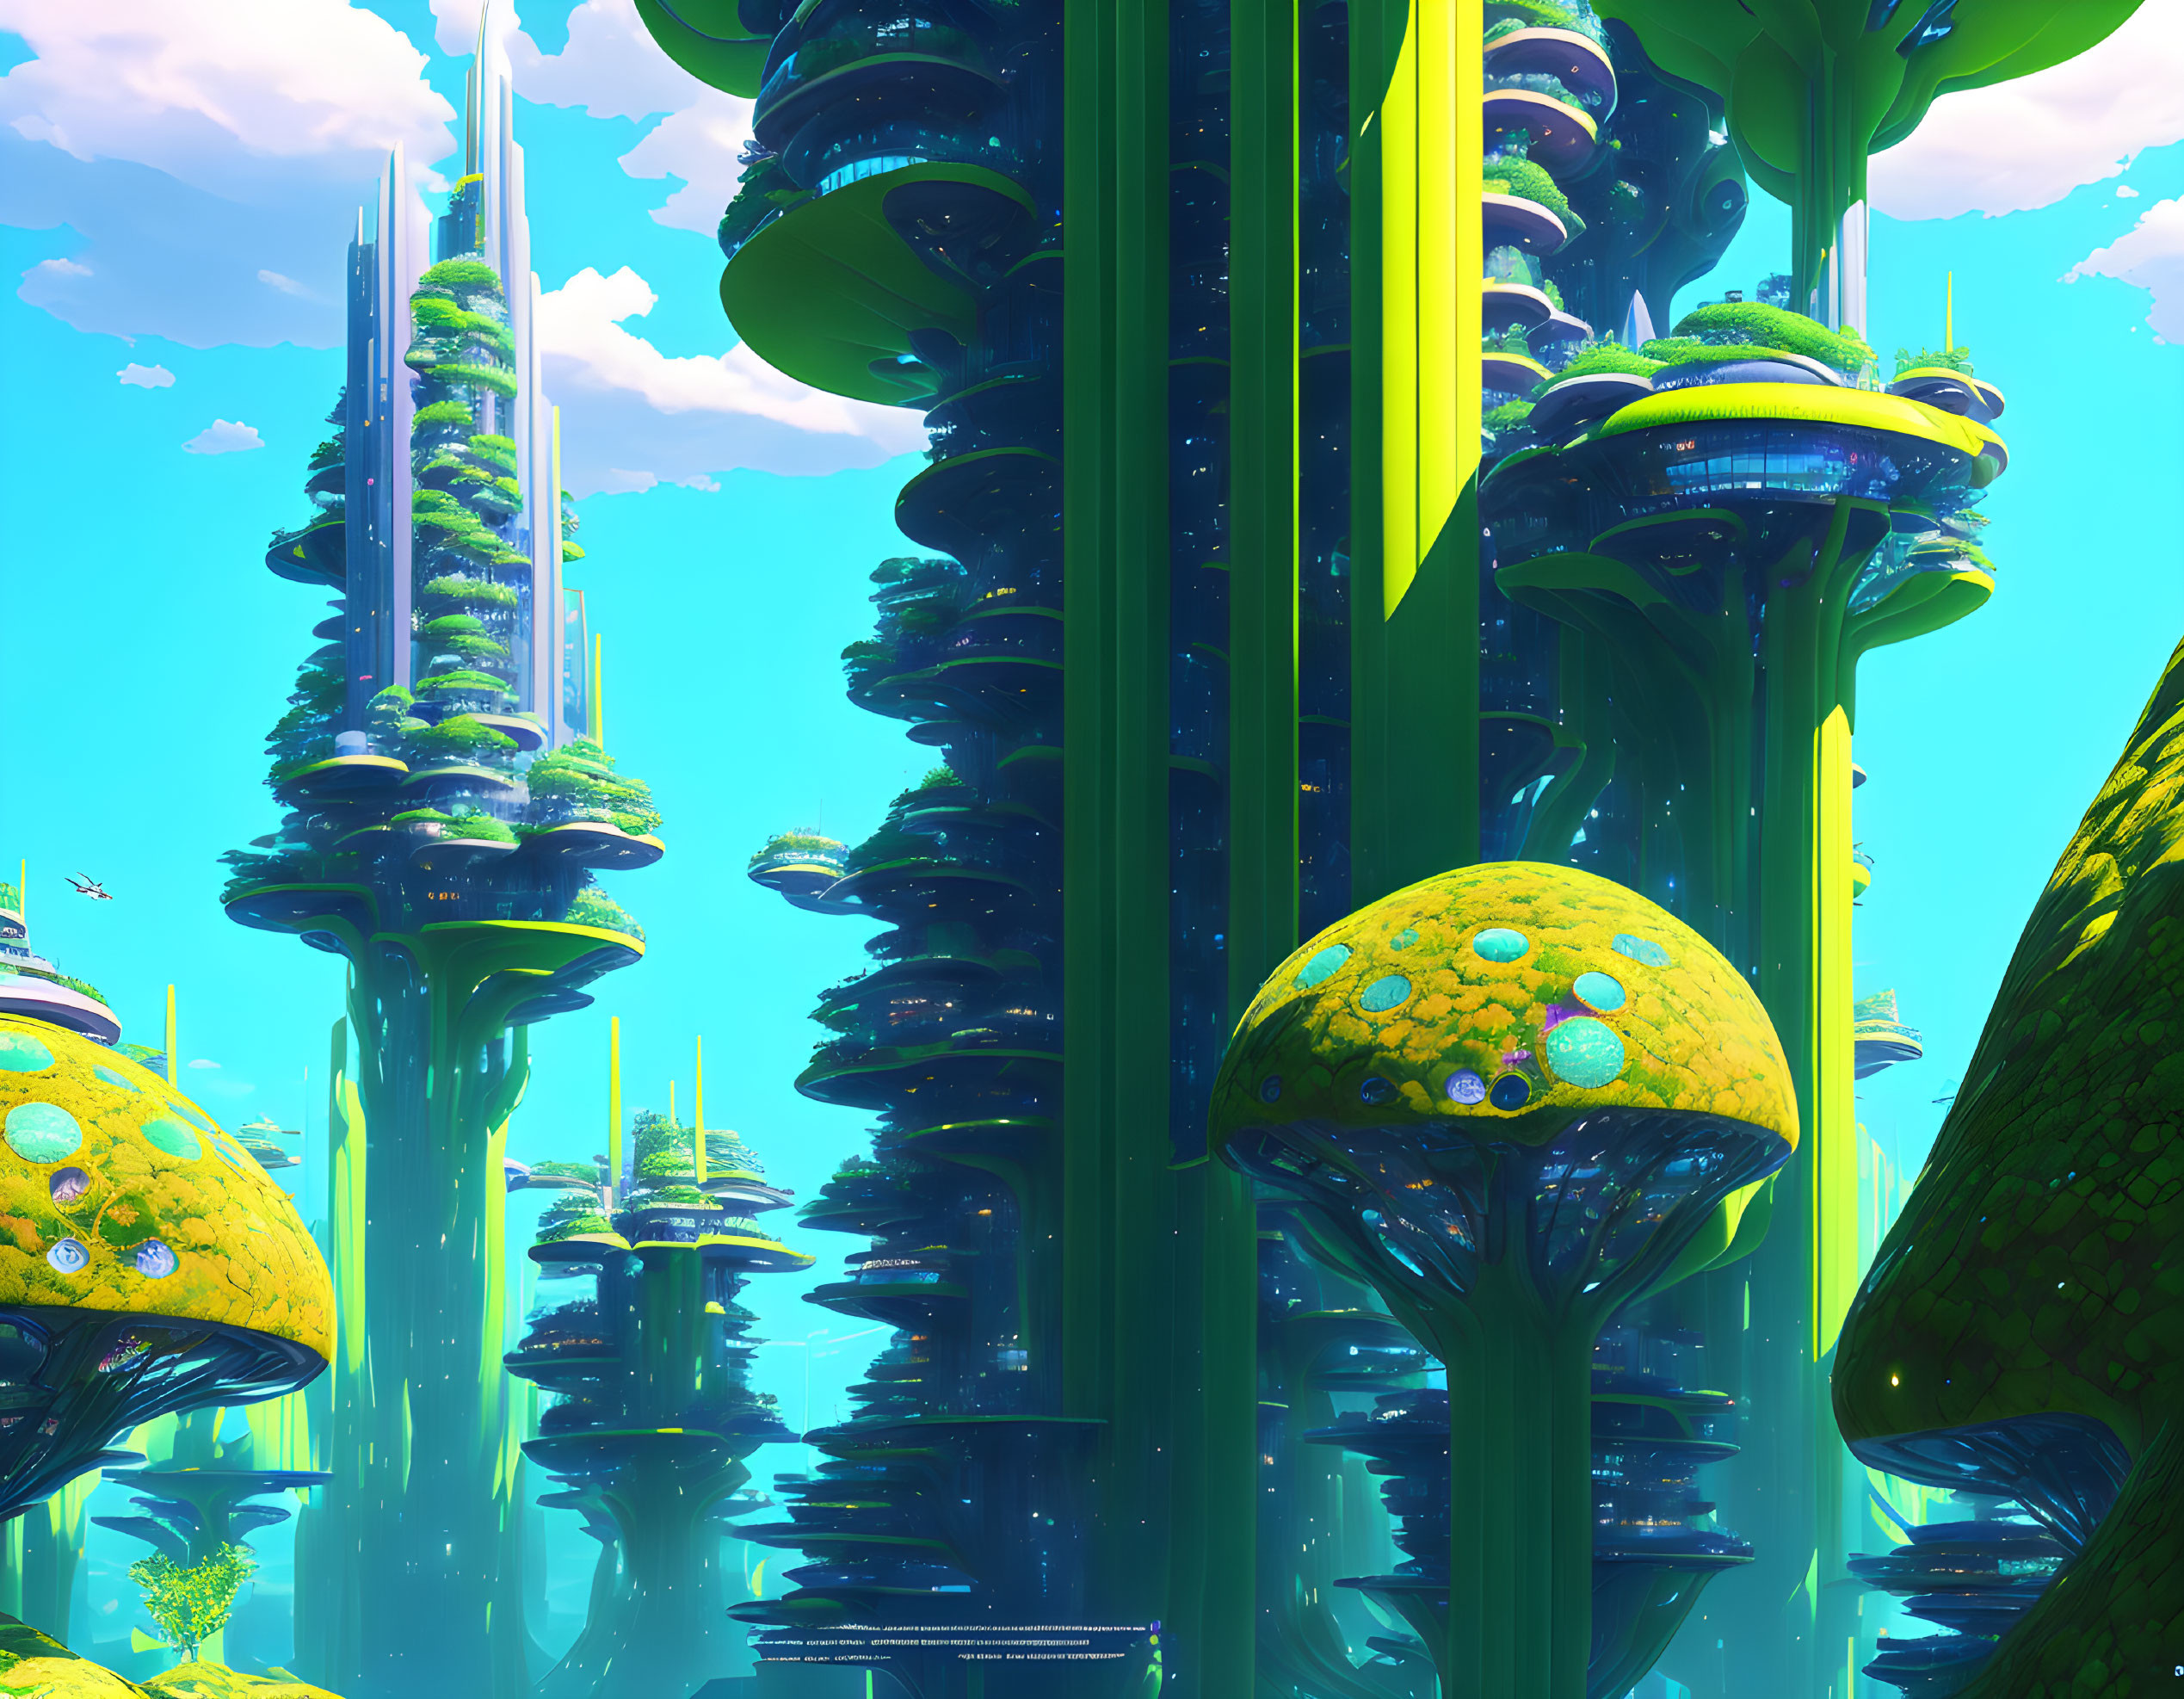 Towering green structures in futuristic cityscape